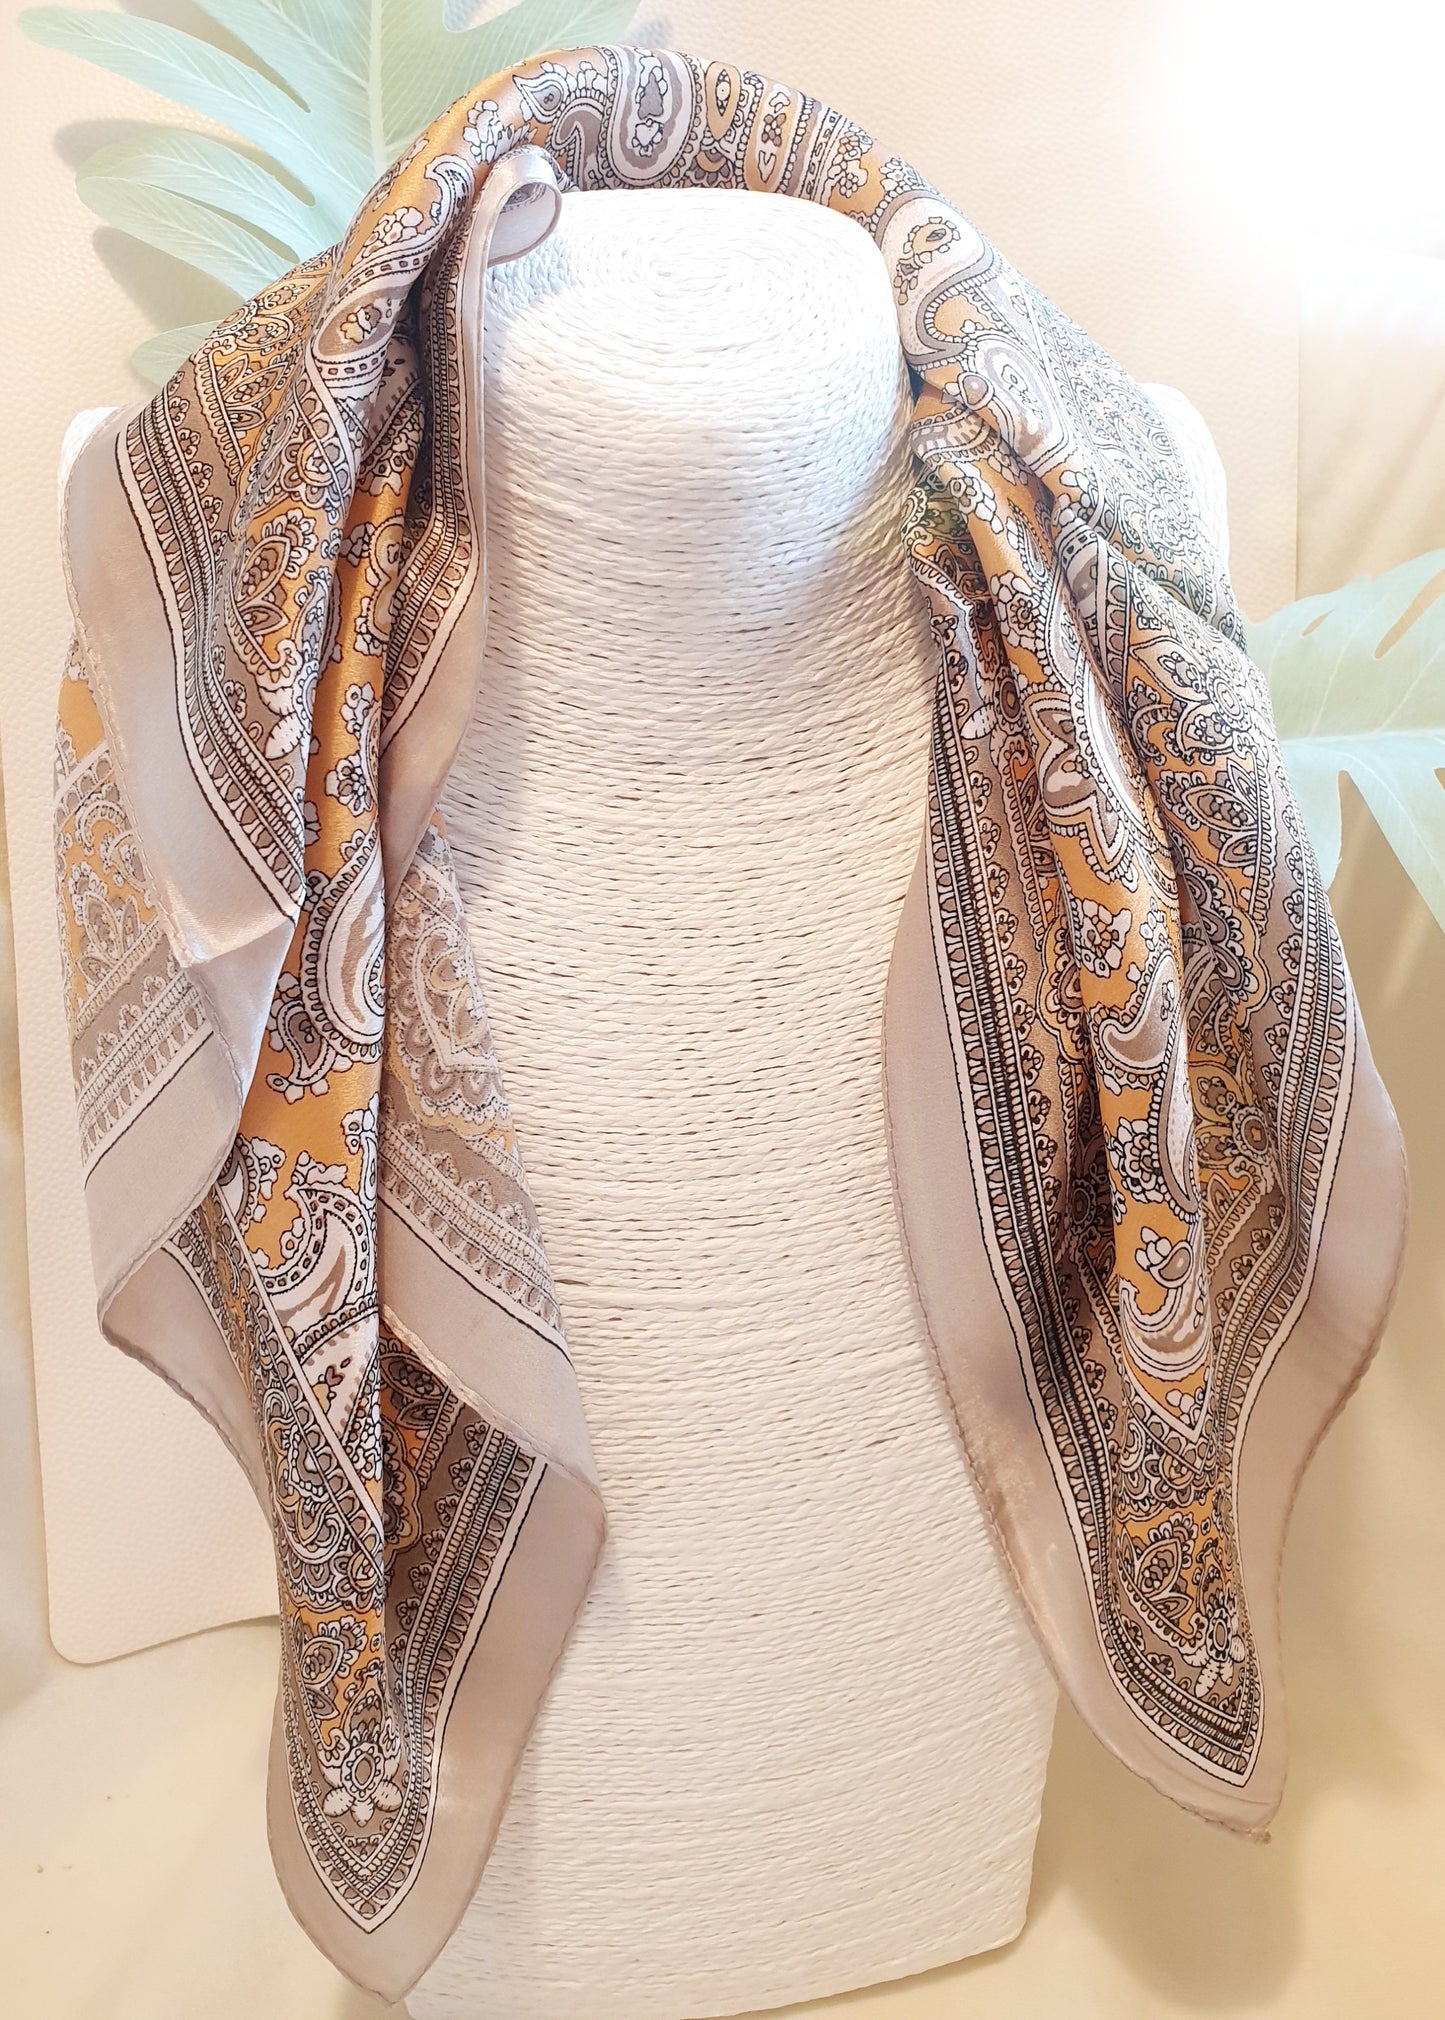 Nickituch aus Seide mit Paisley Muster in taupe apricot